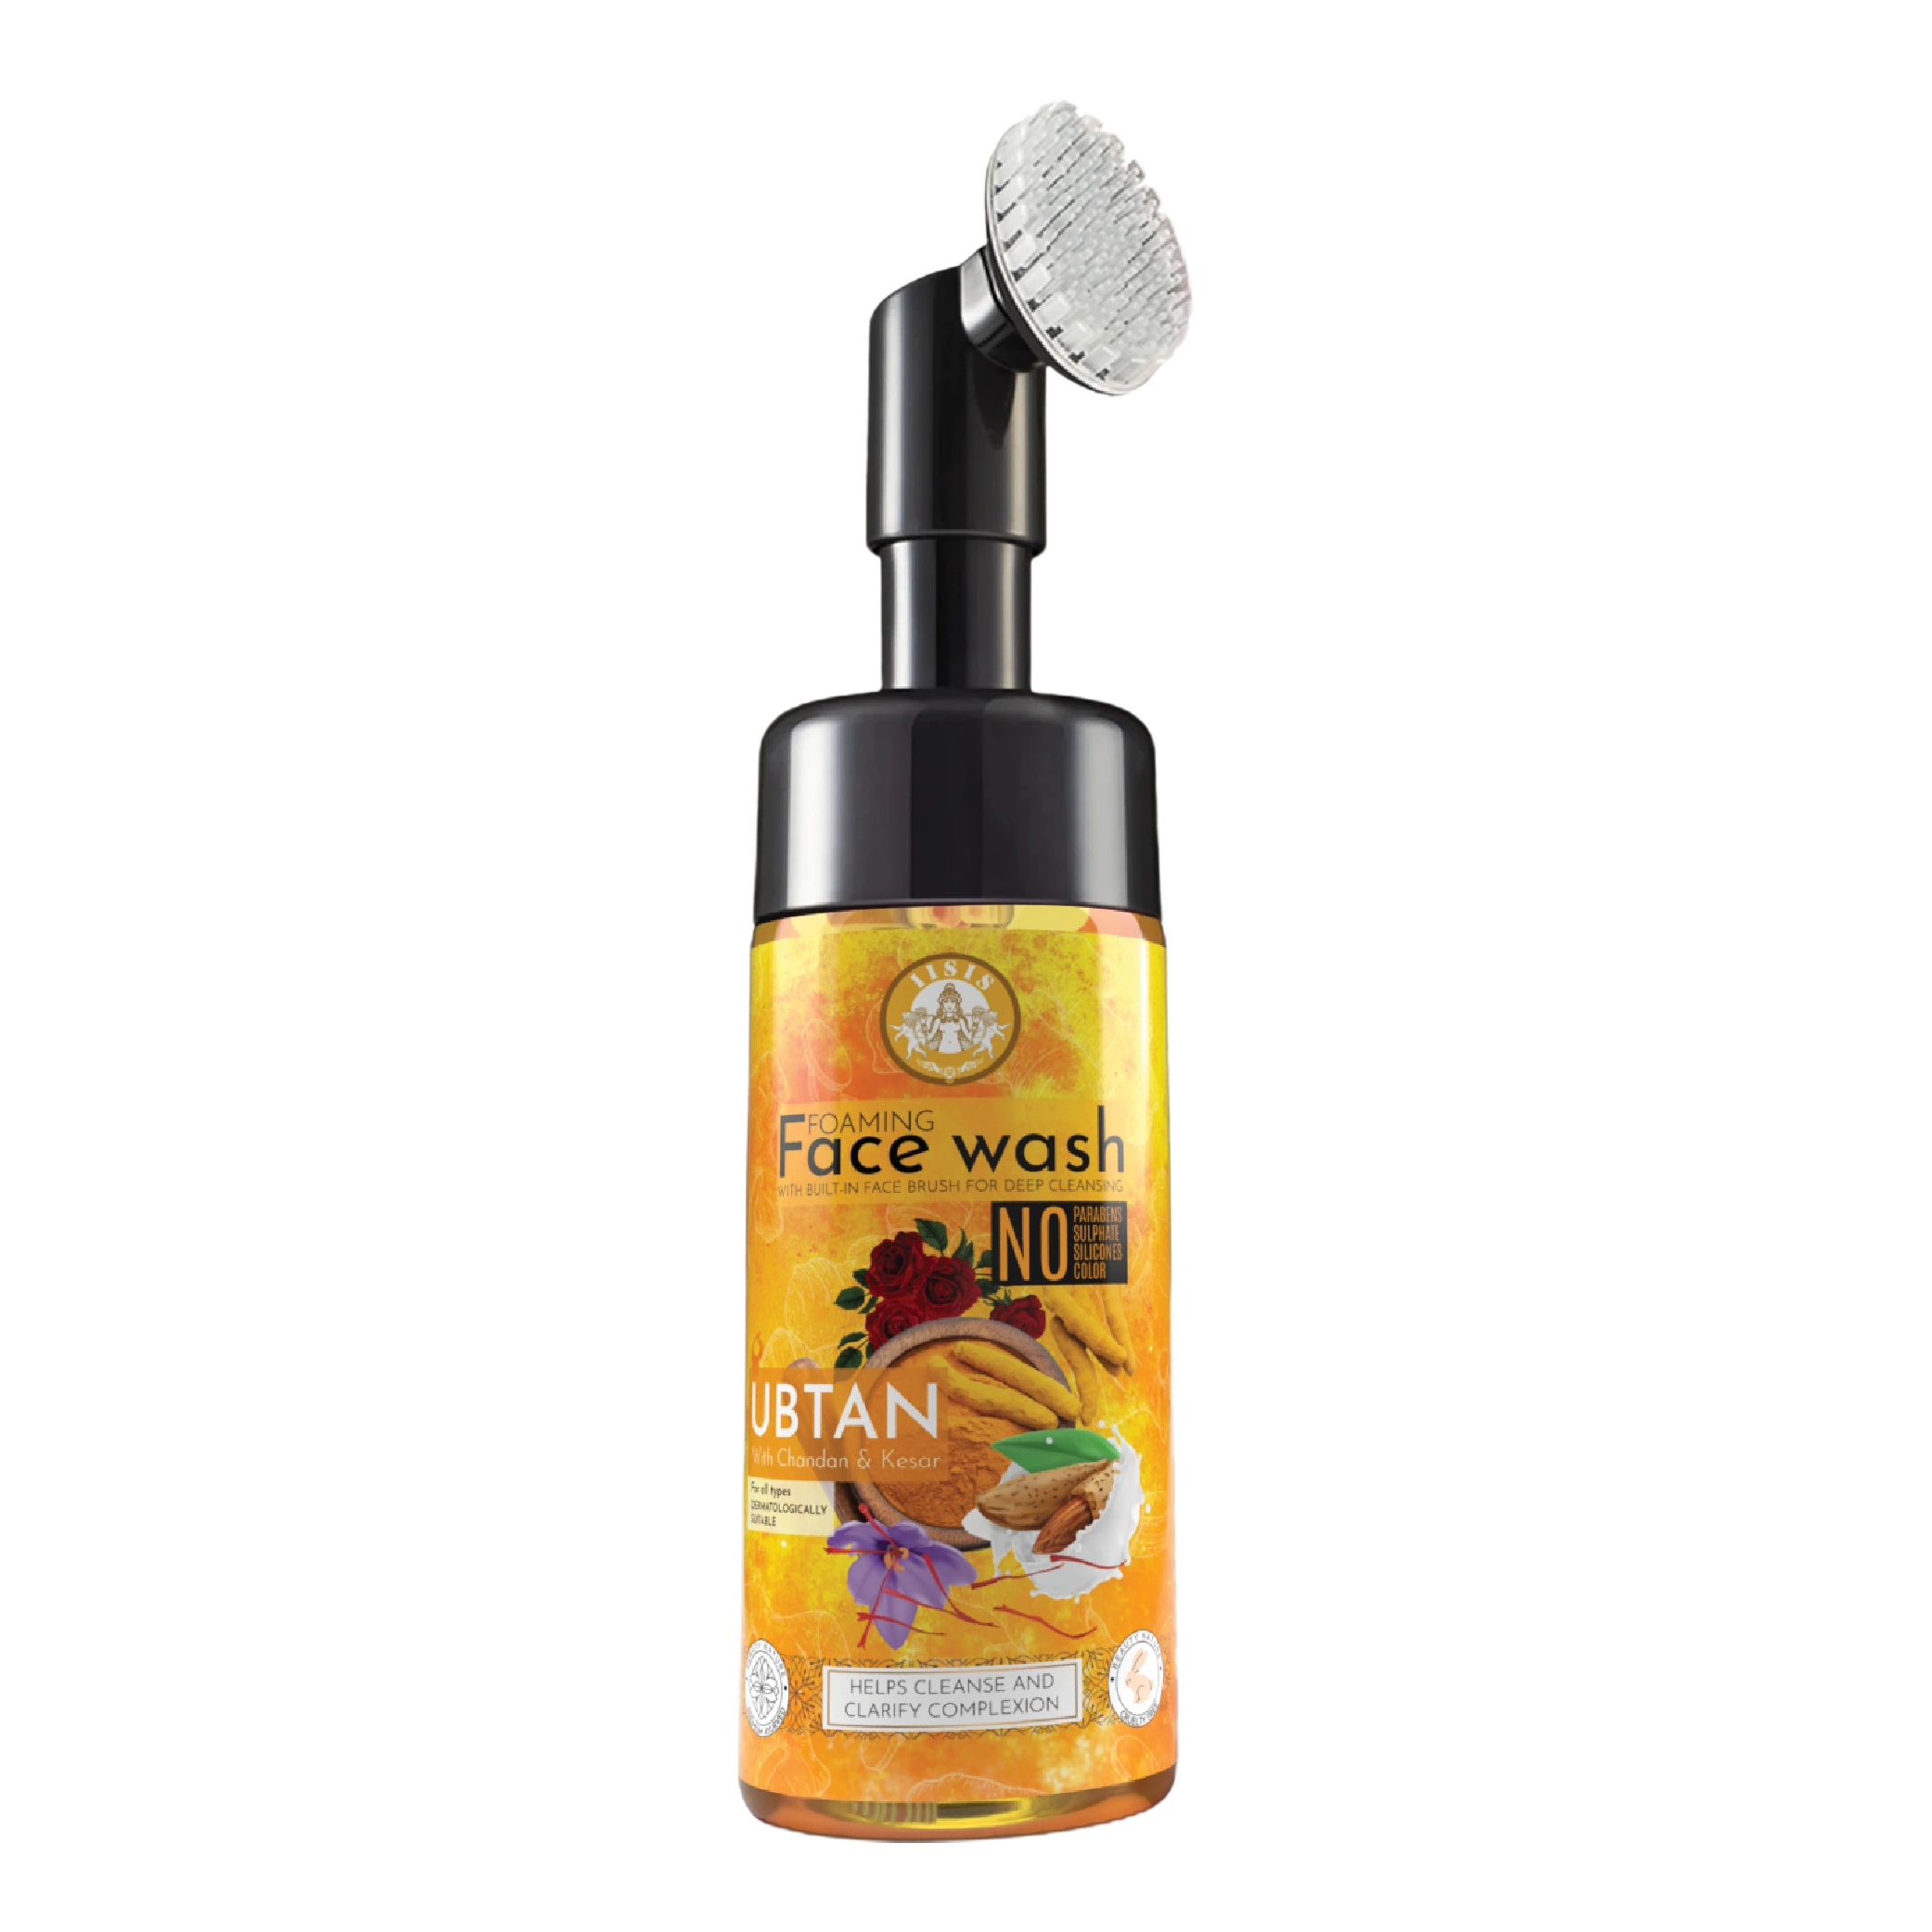 Ubtan With Chandan & Kesar Foaming Face Wash With Built-In Face Brush (150ml)